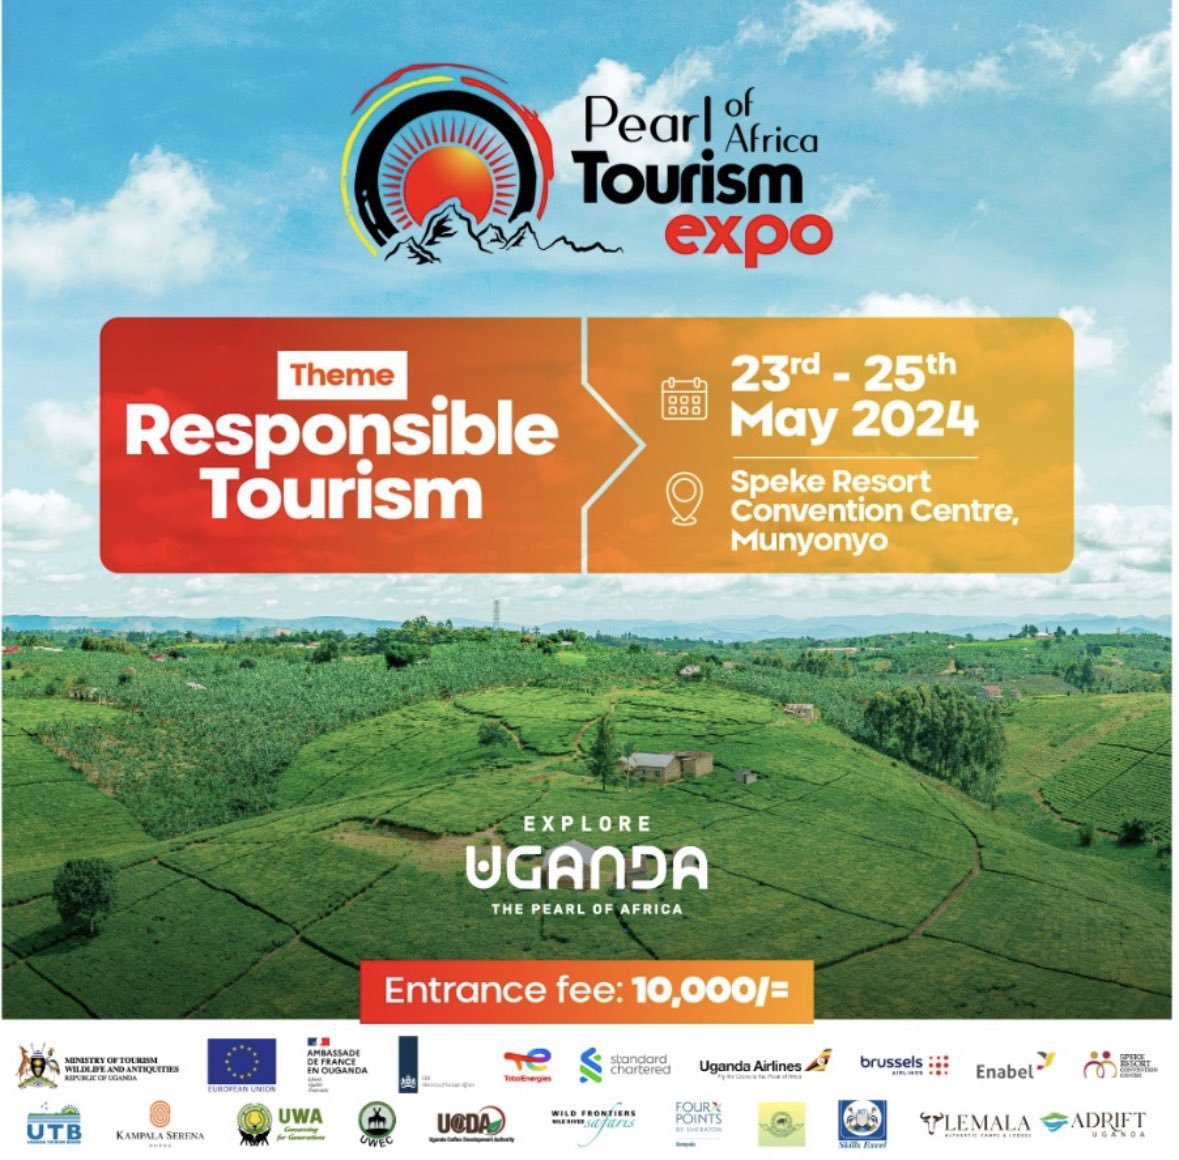 Ladies and gentlemen, it’s now officially the POATE week. Come through for seminars to learn from experts, access exciting travel deals, and networking opportunities. Starting this Thursday, 23 -25 MAY 2024 📍 @spekeresort FEE: ugx 10,000 #POATE2024 #ResponsibleTourism